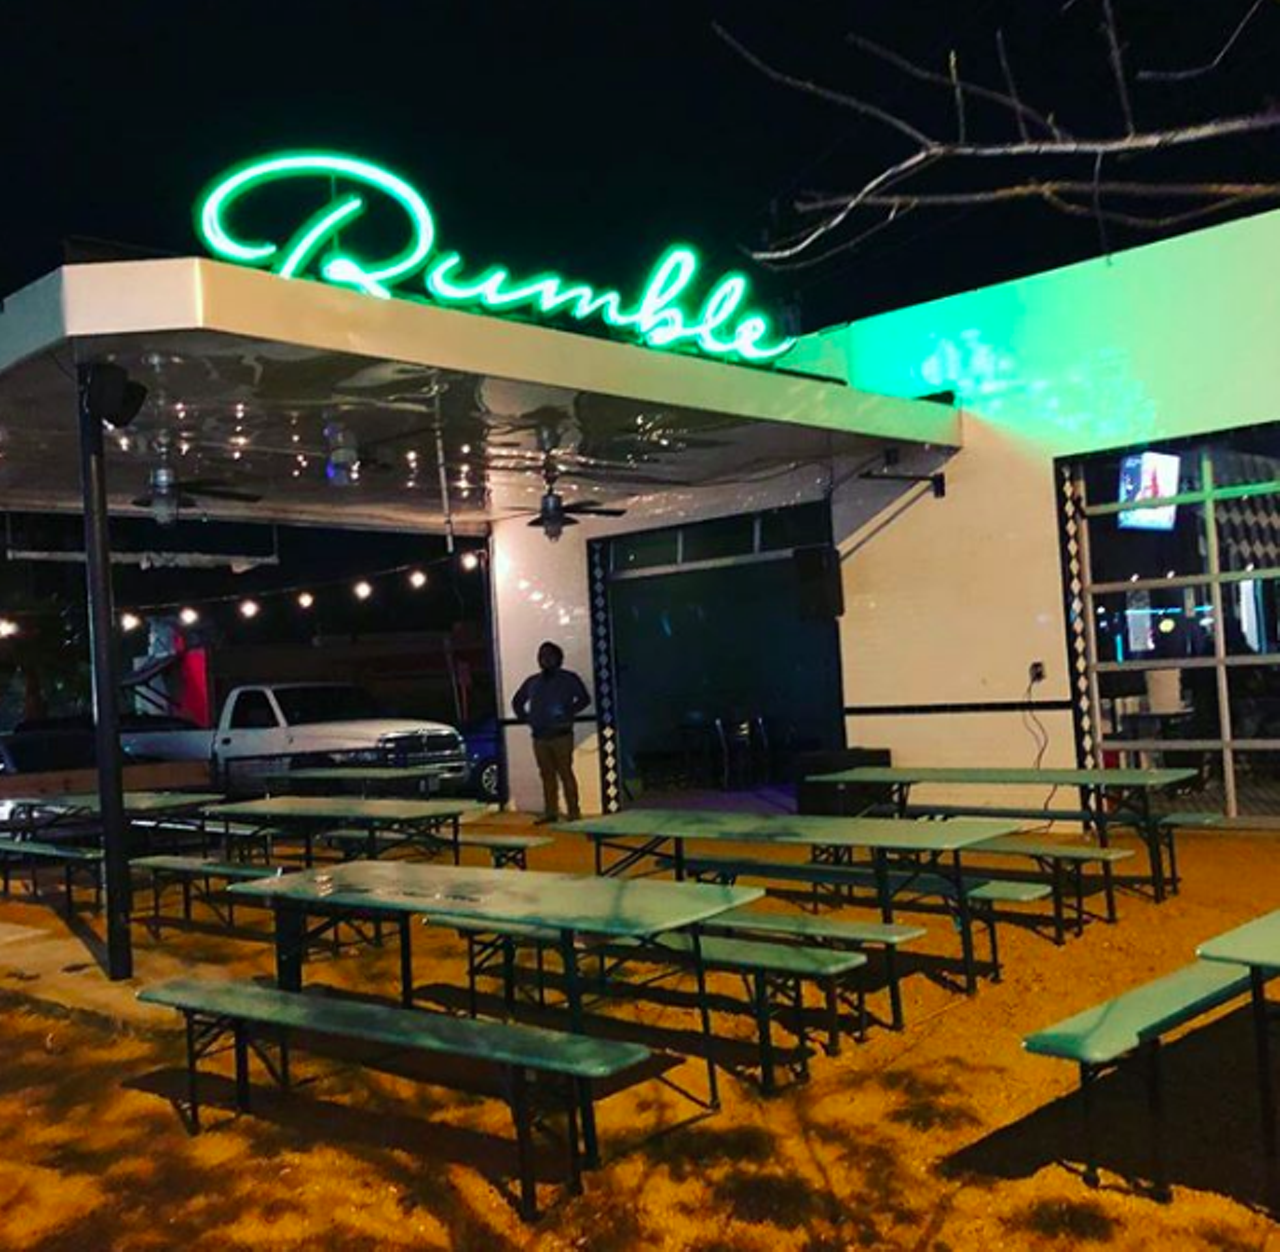 Rumble
2410 N St Mary's St, (210) 885-3925, rumblesatx.com
Beer, mixed drinks, frozen drinks – you can have it all at Rumble. And the best news of all is that you can enjoy the booze and patio vibes with your pup by your side.
Photo via Instagram / oteroadaniel